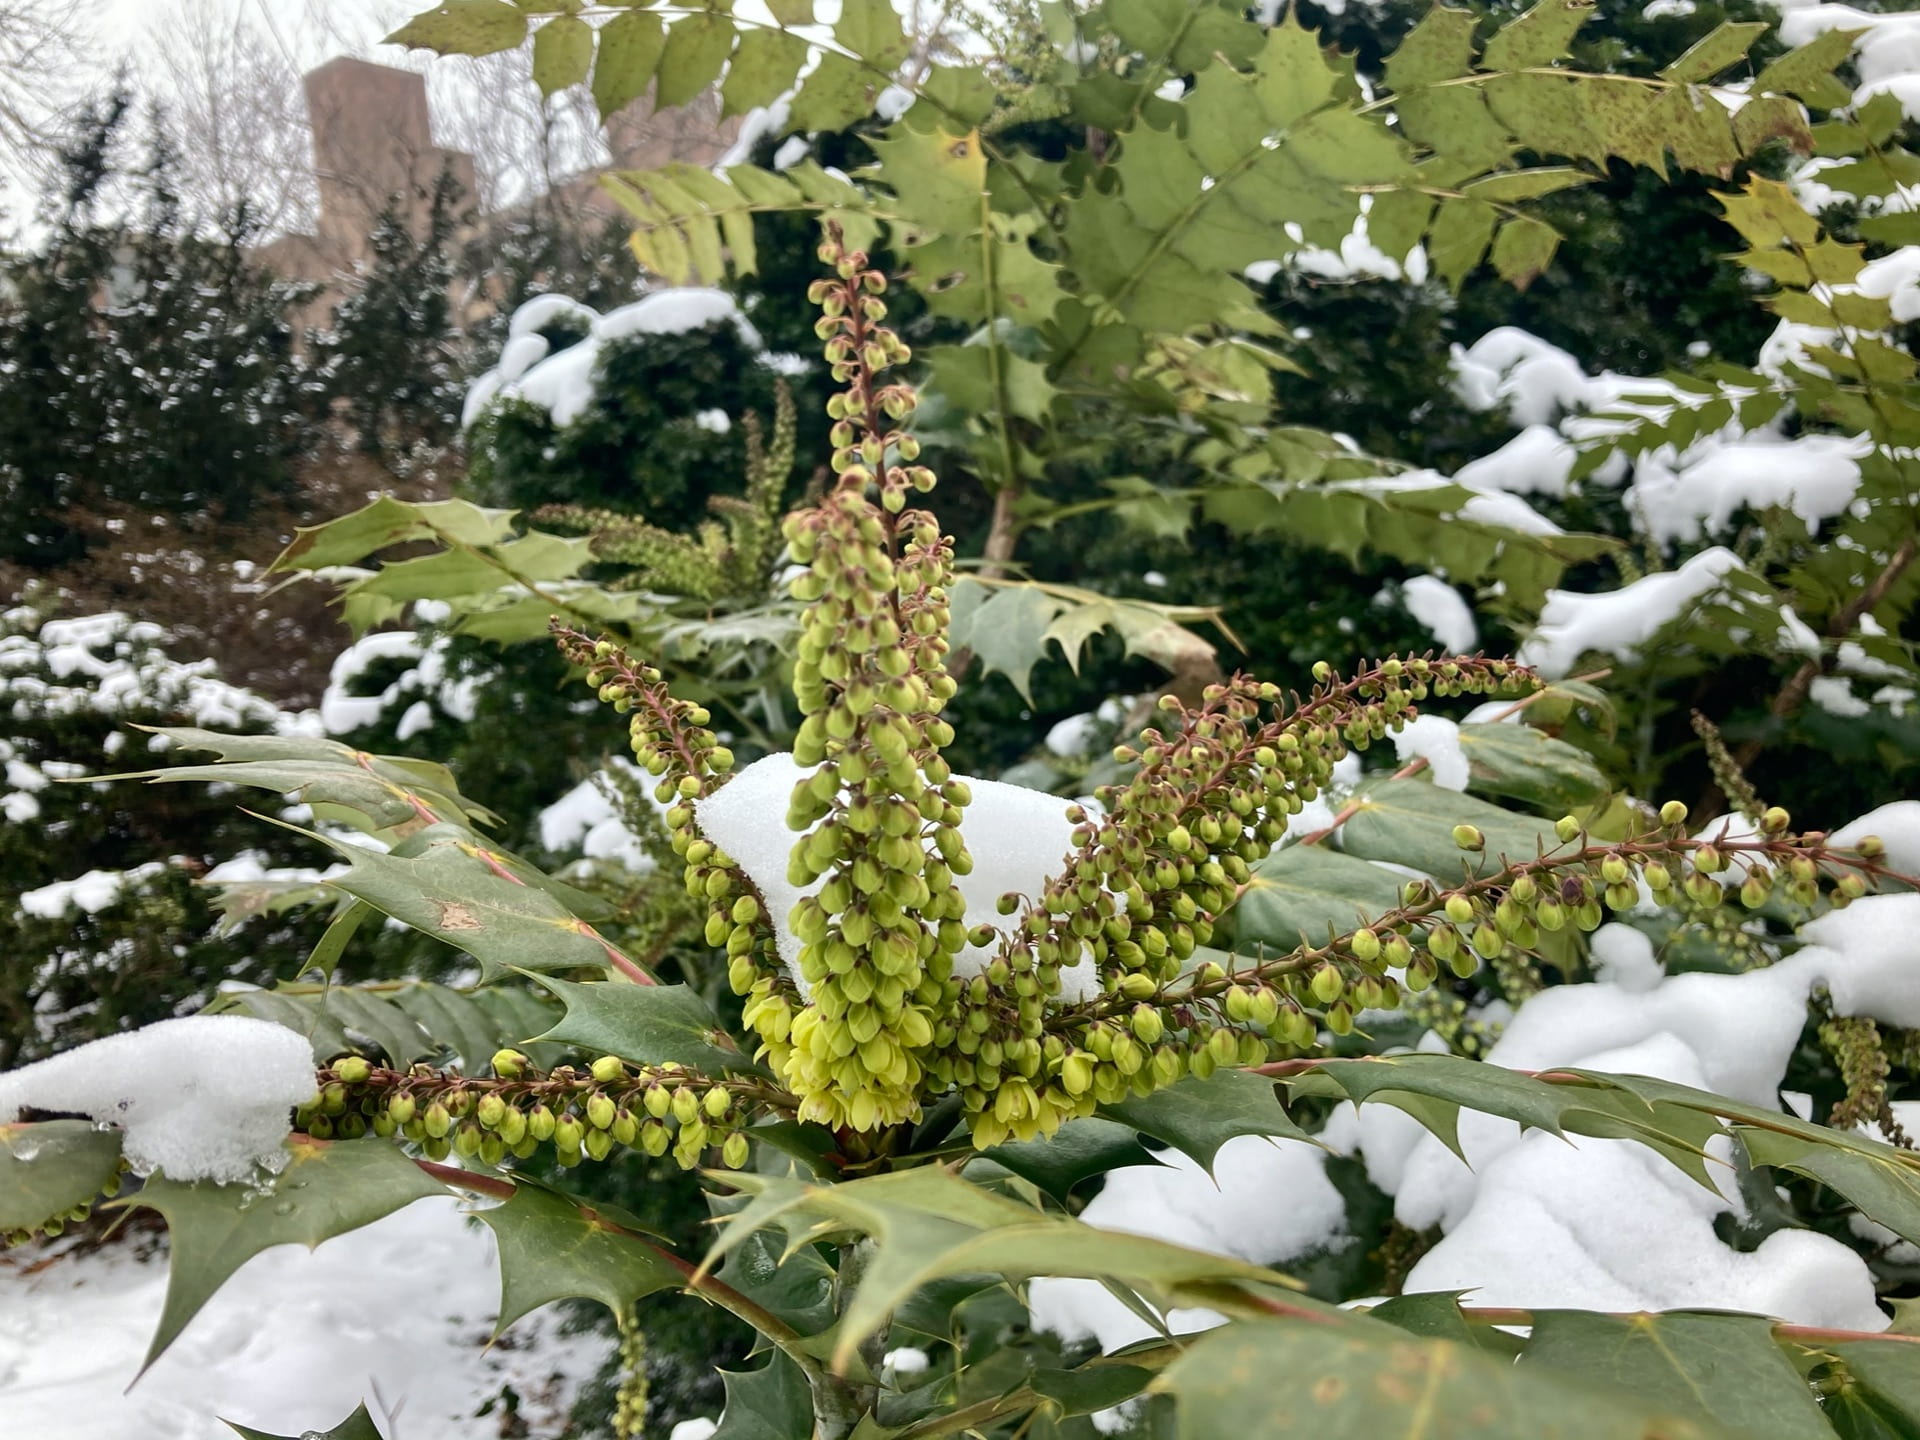 Mahonia bealei getting ready to bloom.